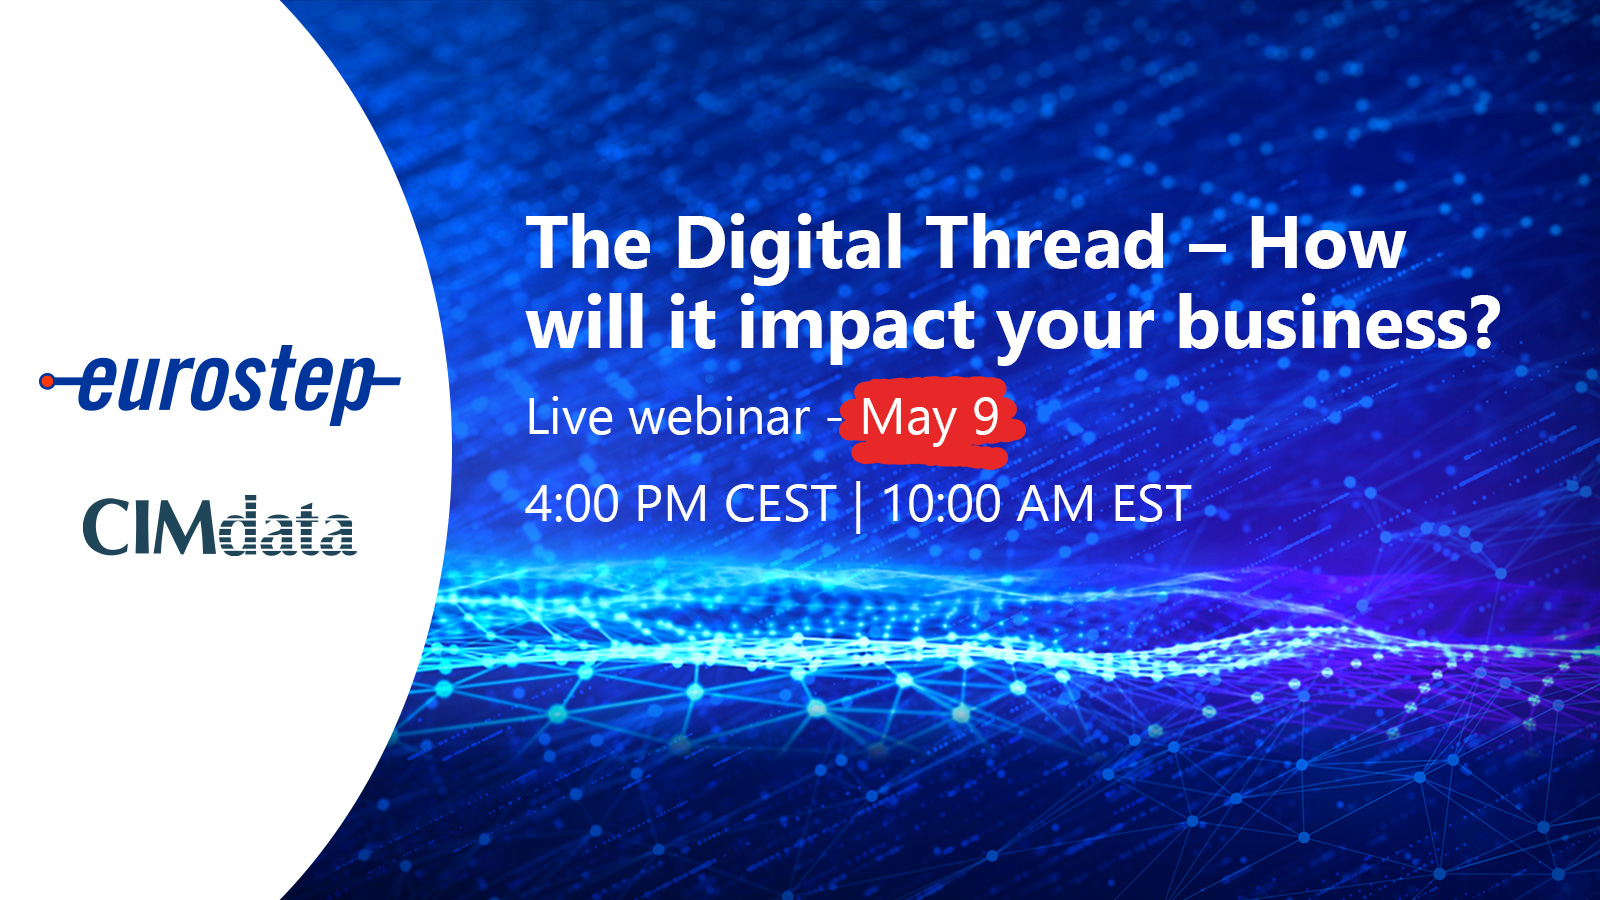 Webinar: The Digital Thread - How wil it impact your business? May 9